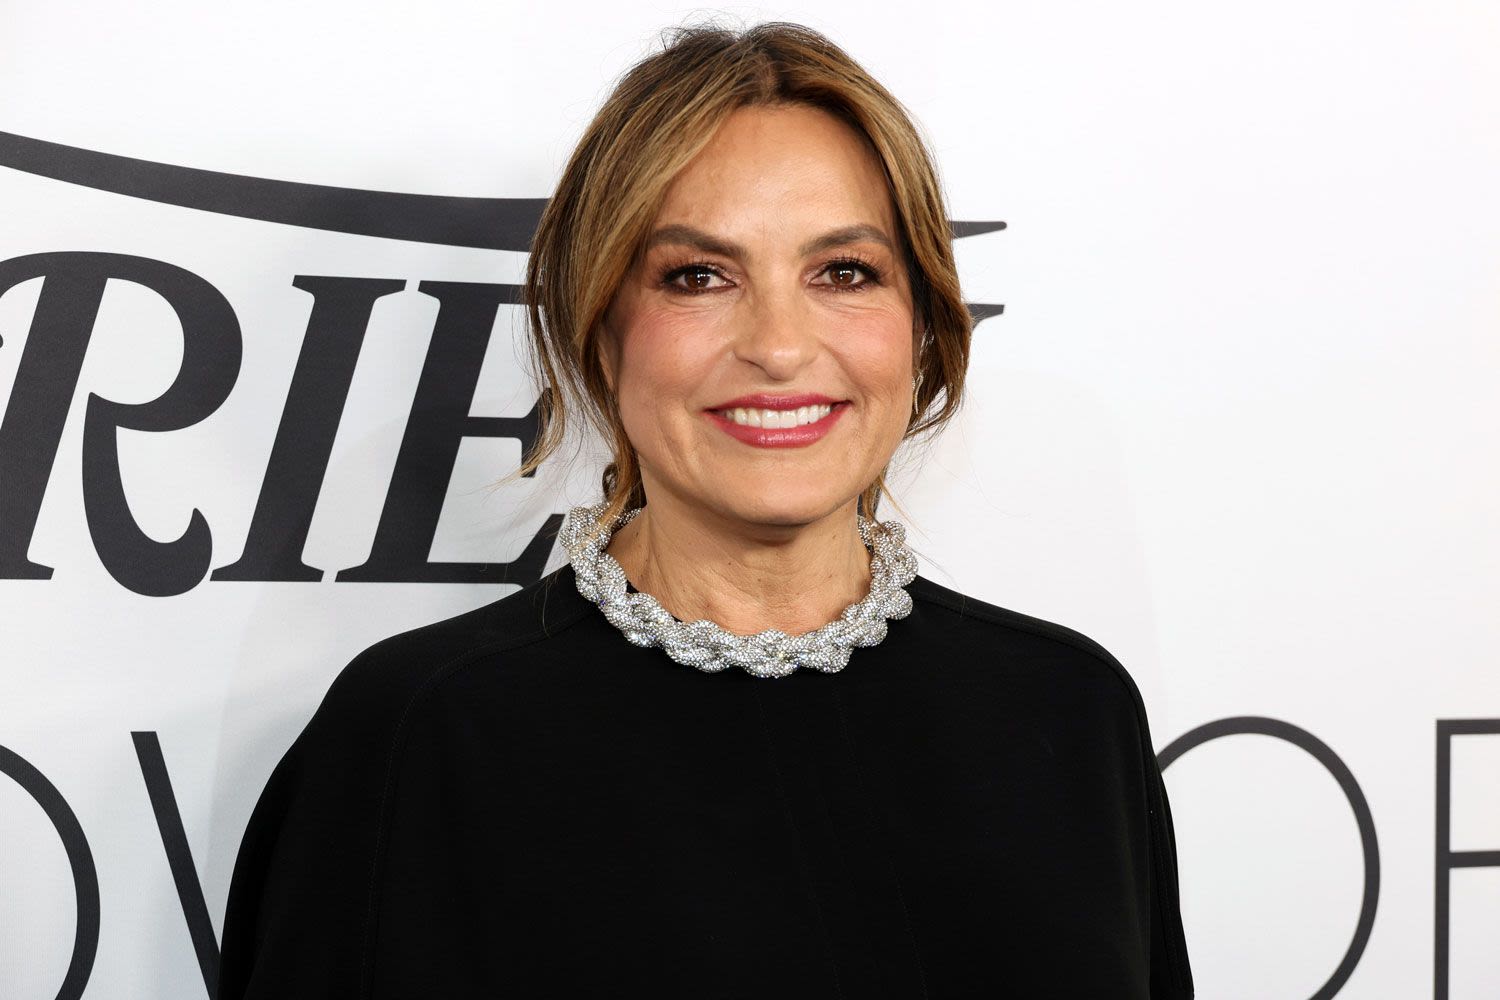 Mariska Hargitay Says She Was 'Meant to Connect' with Young Girl Who Thought She Was Police Officer on SVU Set